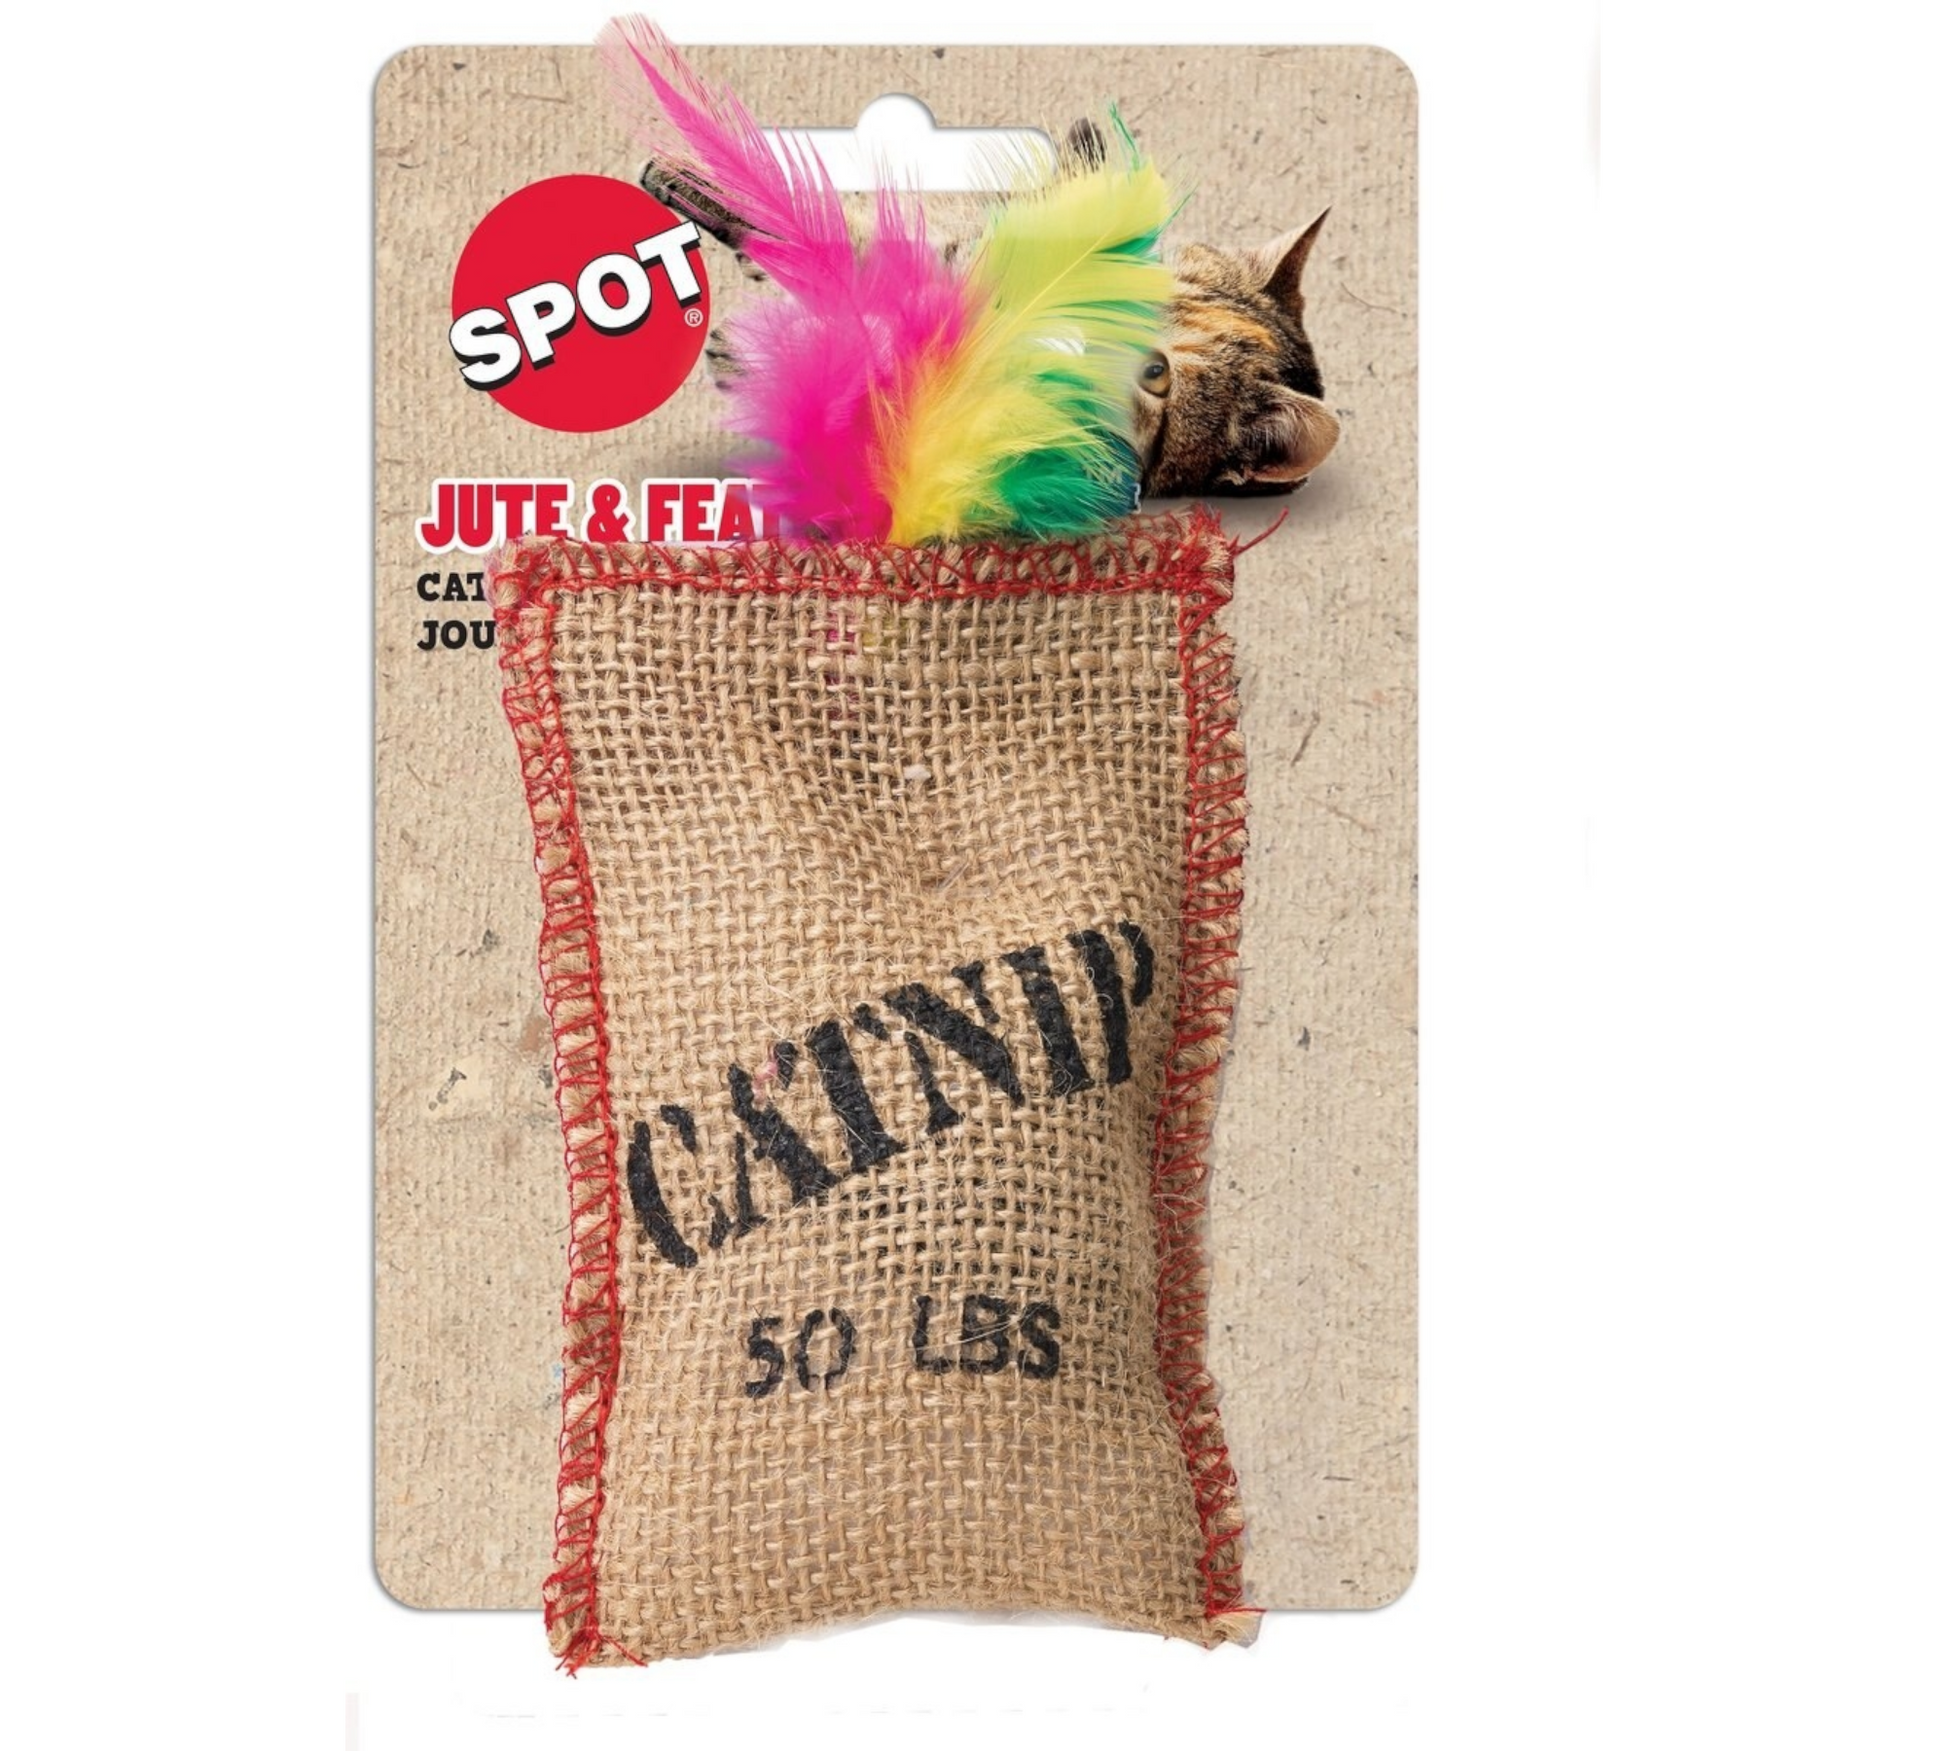 Canine's World Catnip Toys Spot Pet Jute & Feather Sack Plush Cat Toy with Catnip, 4-in Spot